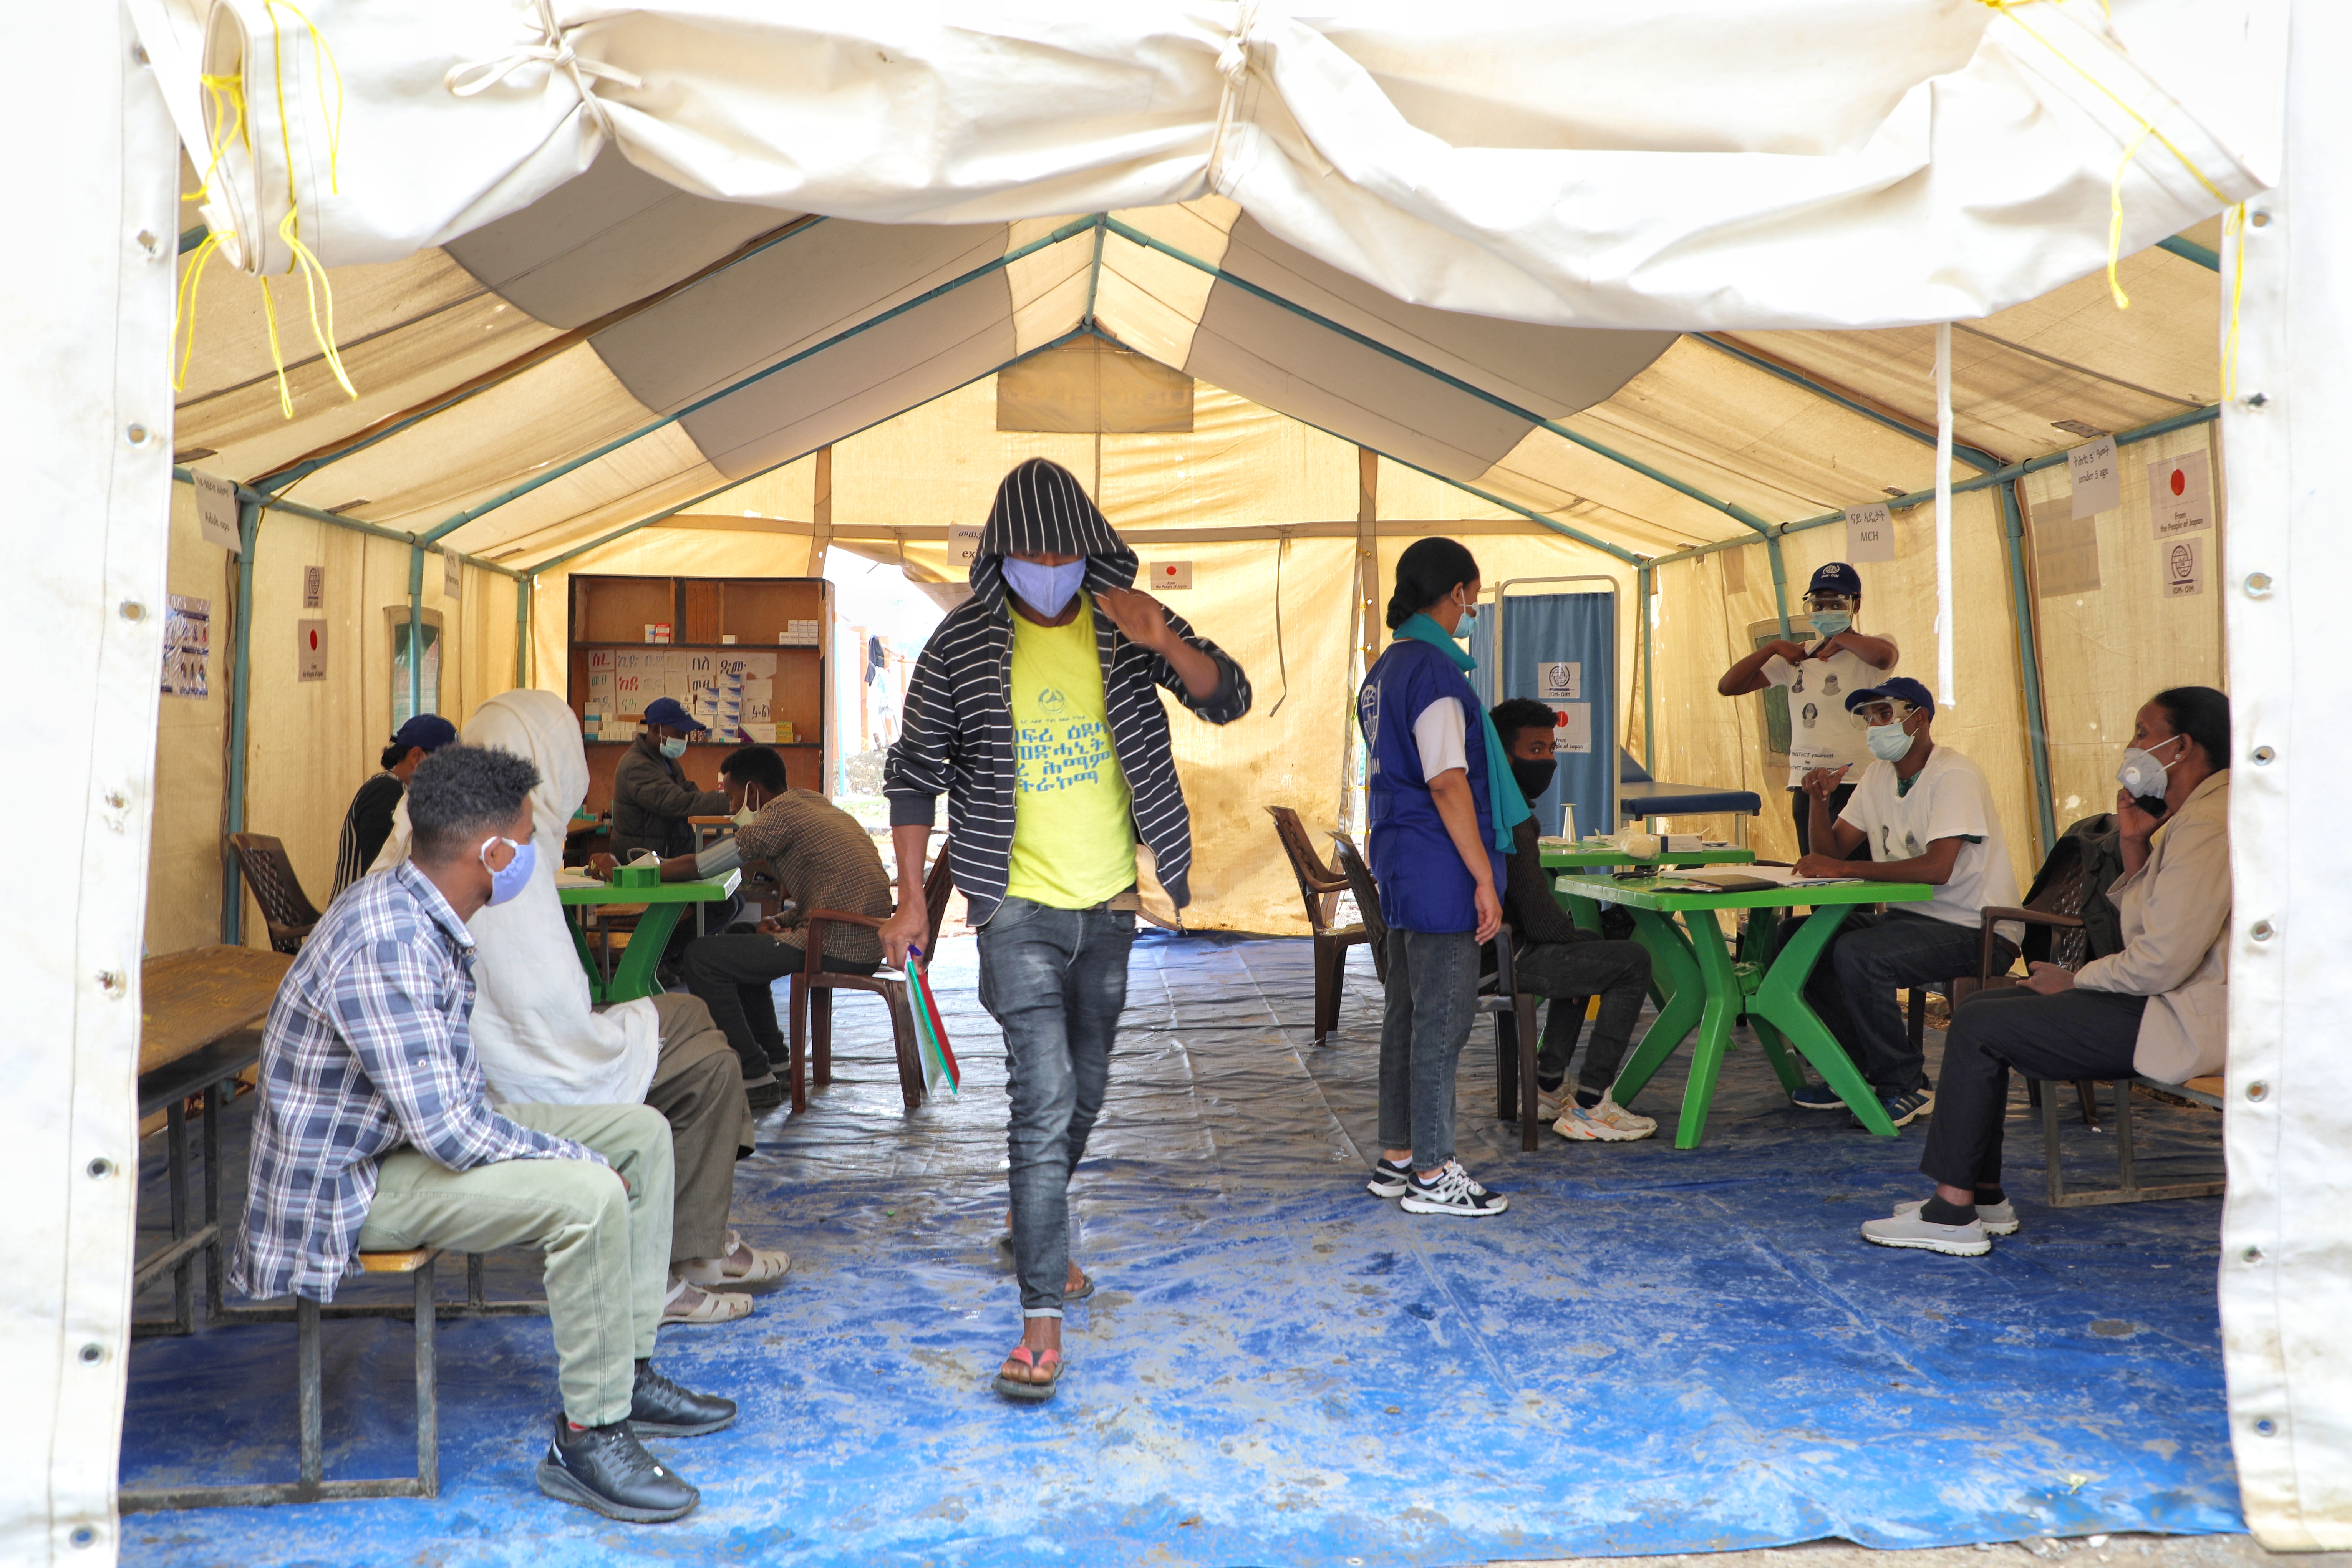 A mobile health clinic set up in an IDP site in Mekelle, Tigray, providing services to hundreds of IDPs every day. Photo: IOM/Kaye Viray